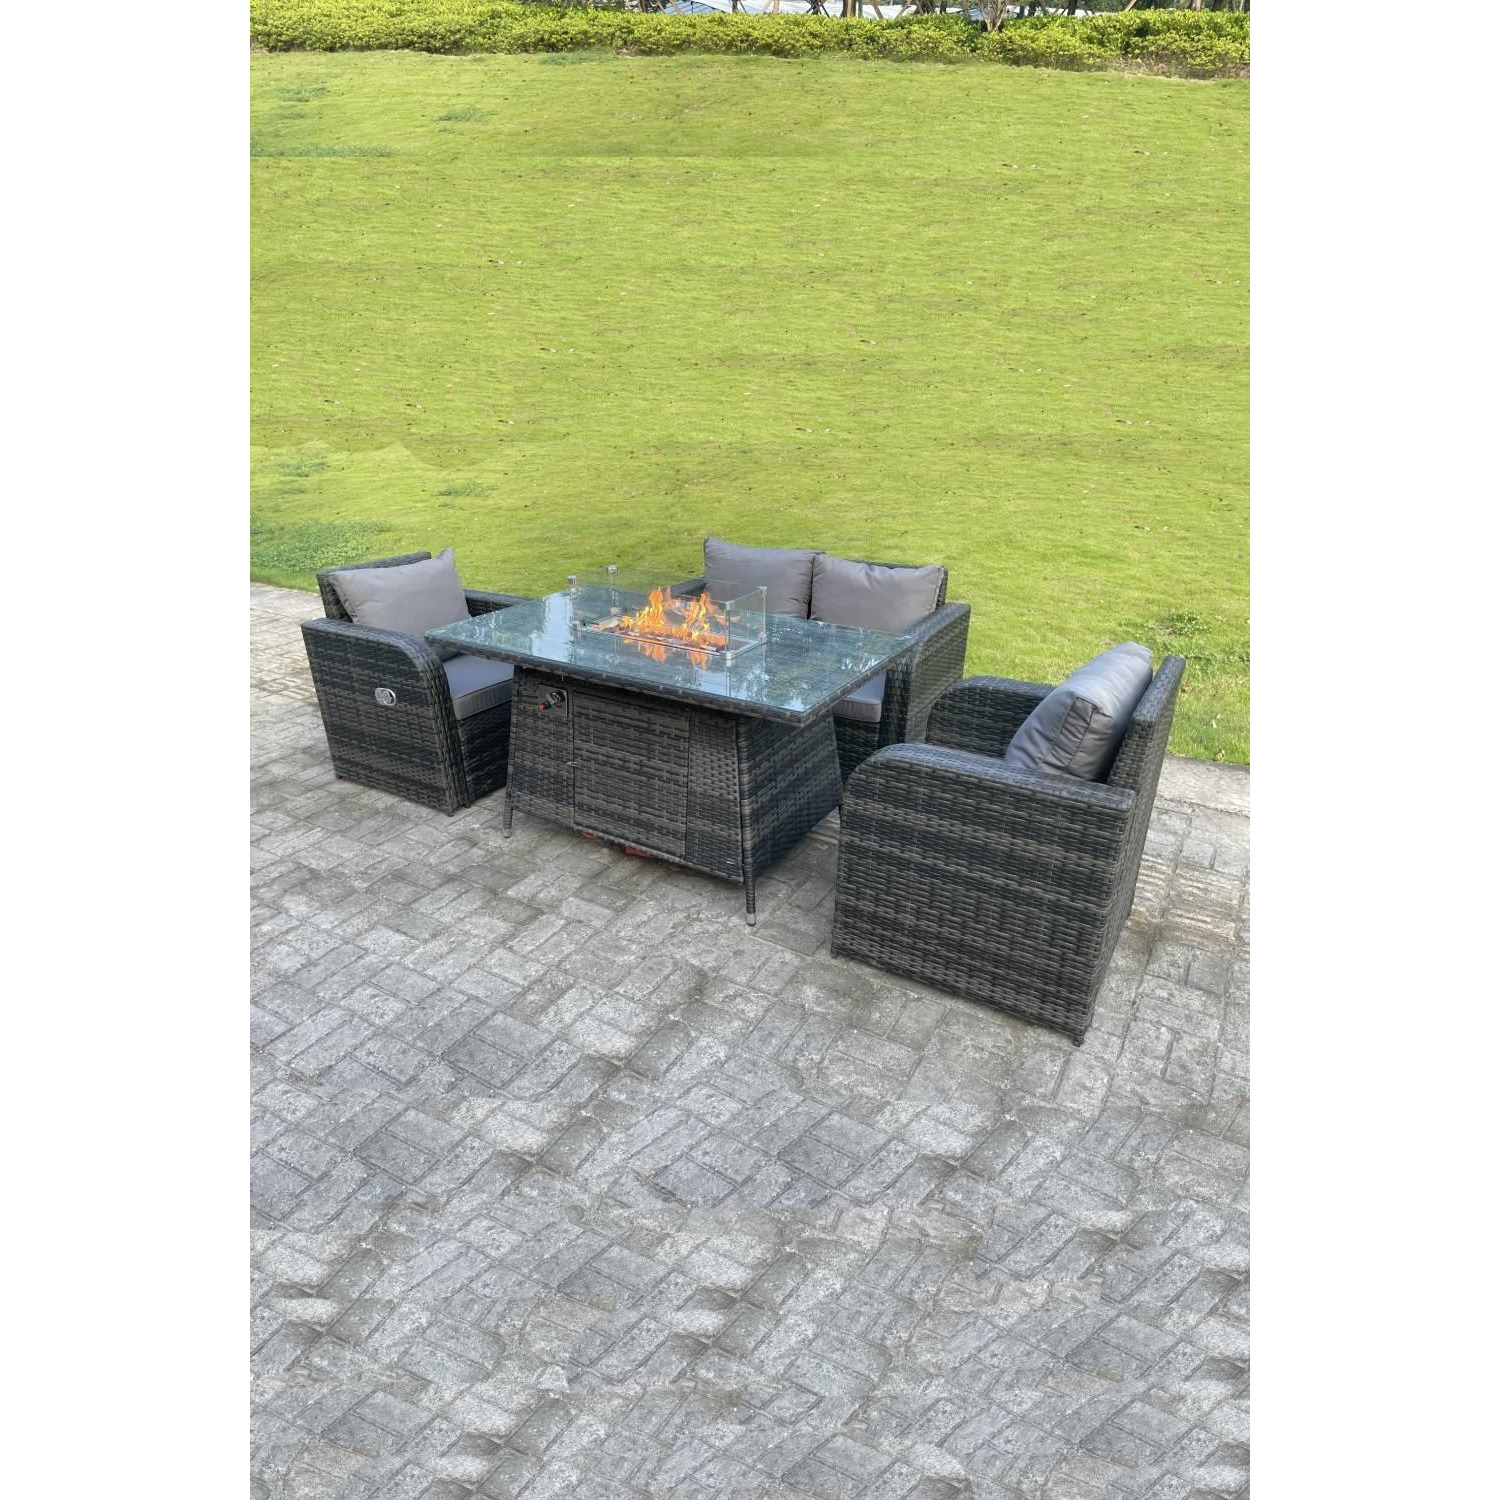 Rattan Outdoor Gas Fire Pit Table Sets Gas Heater Love Sofa Adjustable Chairs - image 1